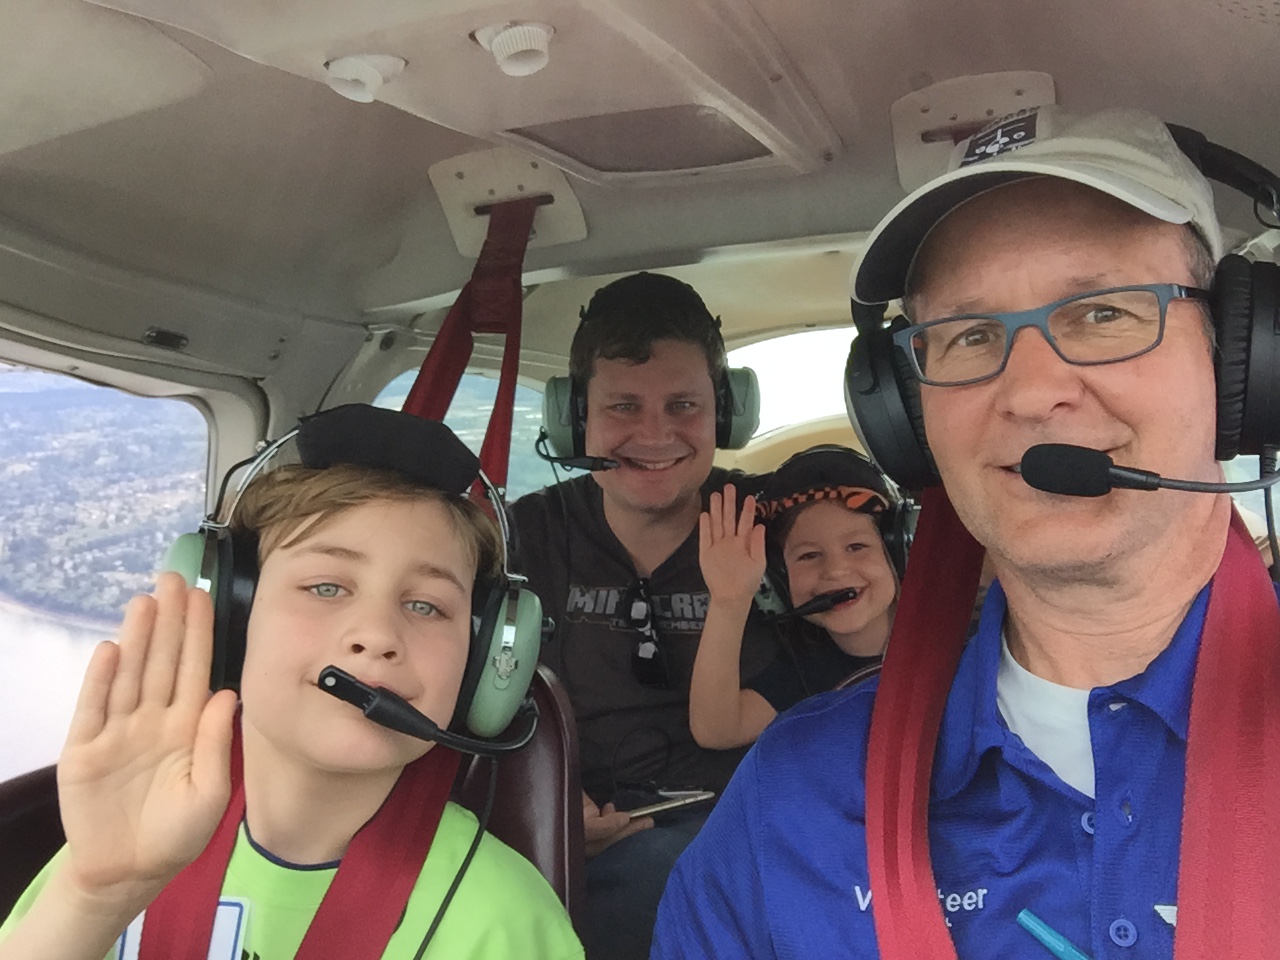 Tulsa, OK Fly Day scheduled for Saturday, October 9, 2021 - Full